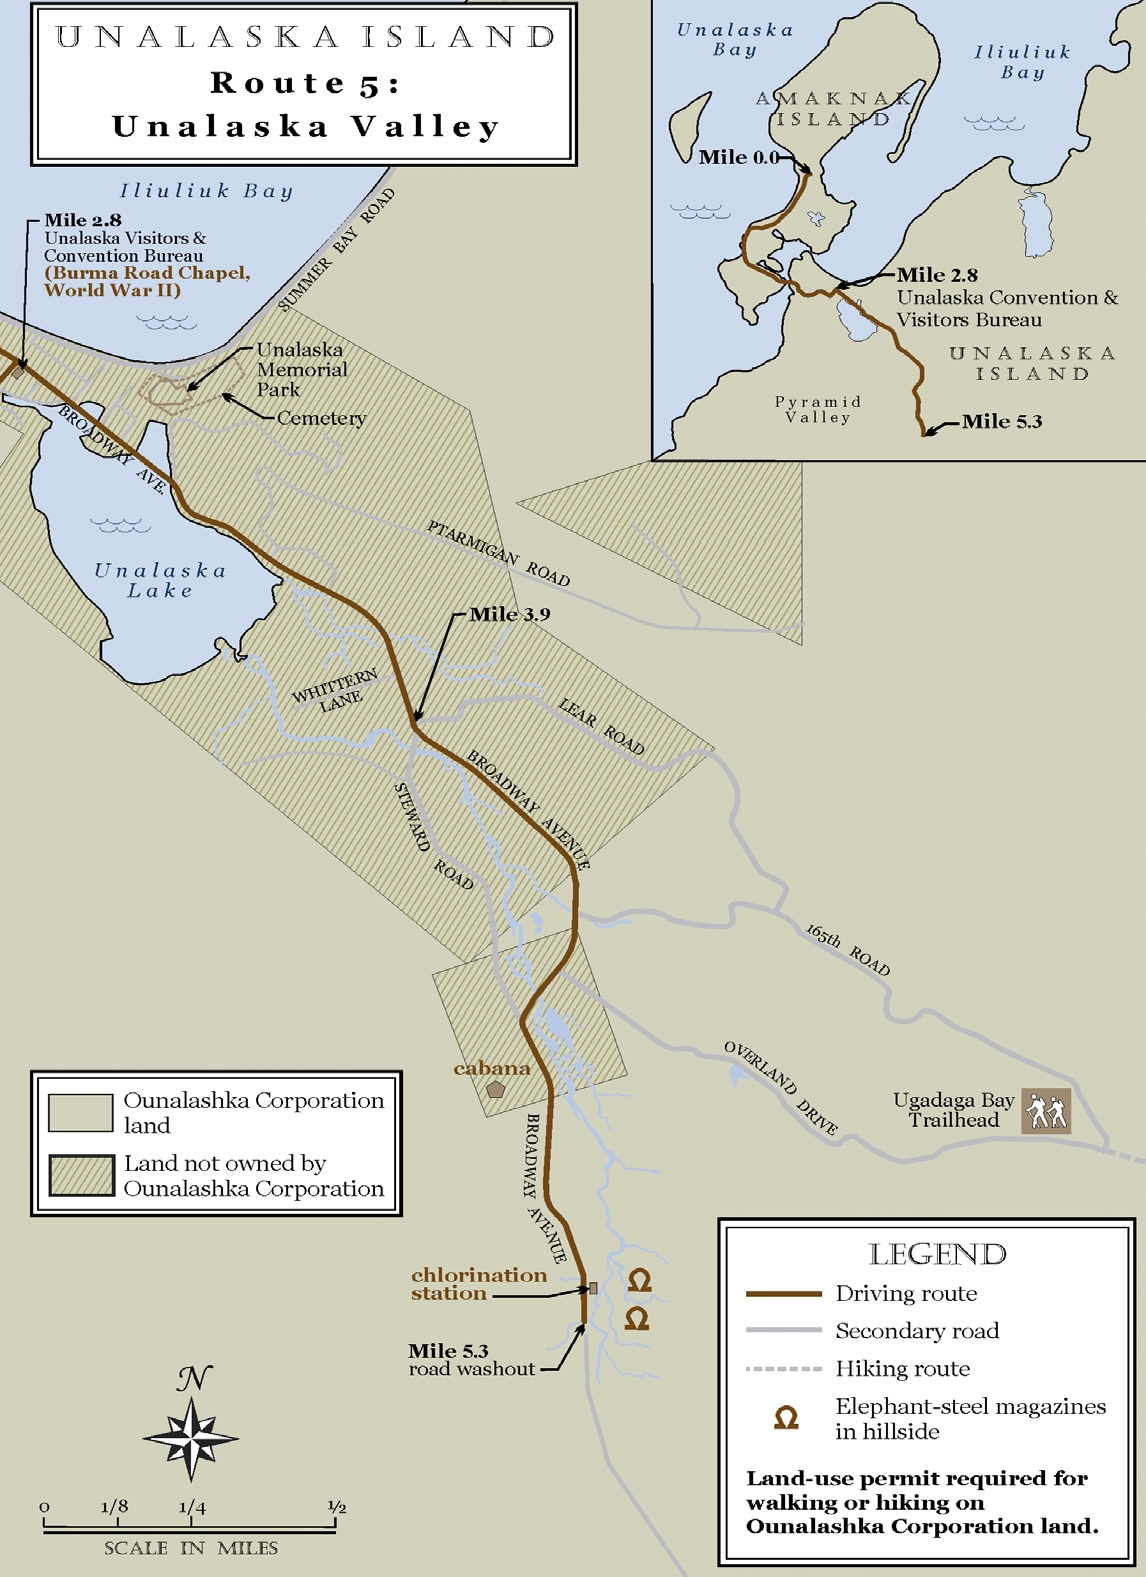 map of driving route from ocean into Unalaska Valley highlighting 4 sites